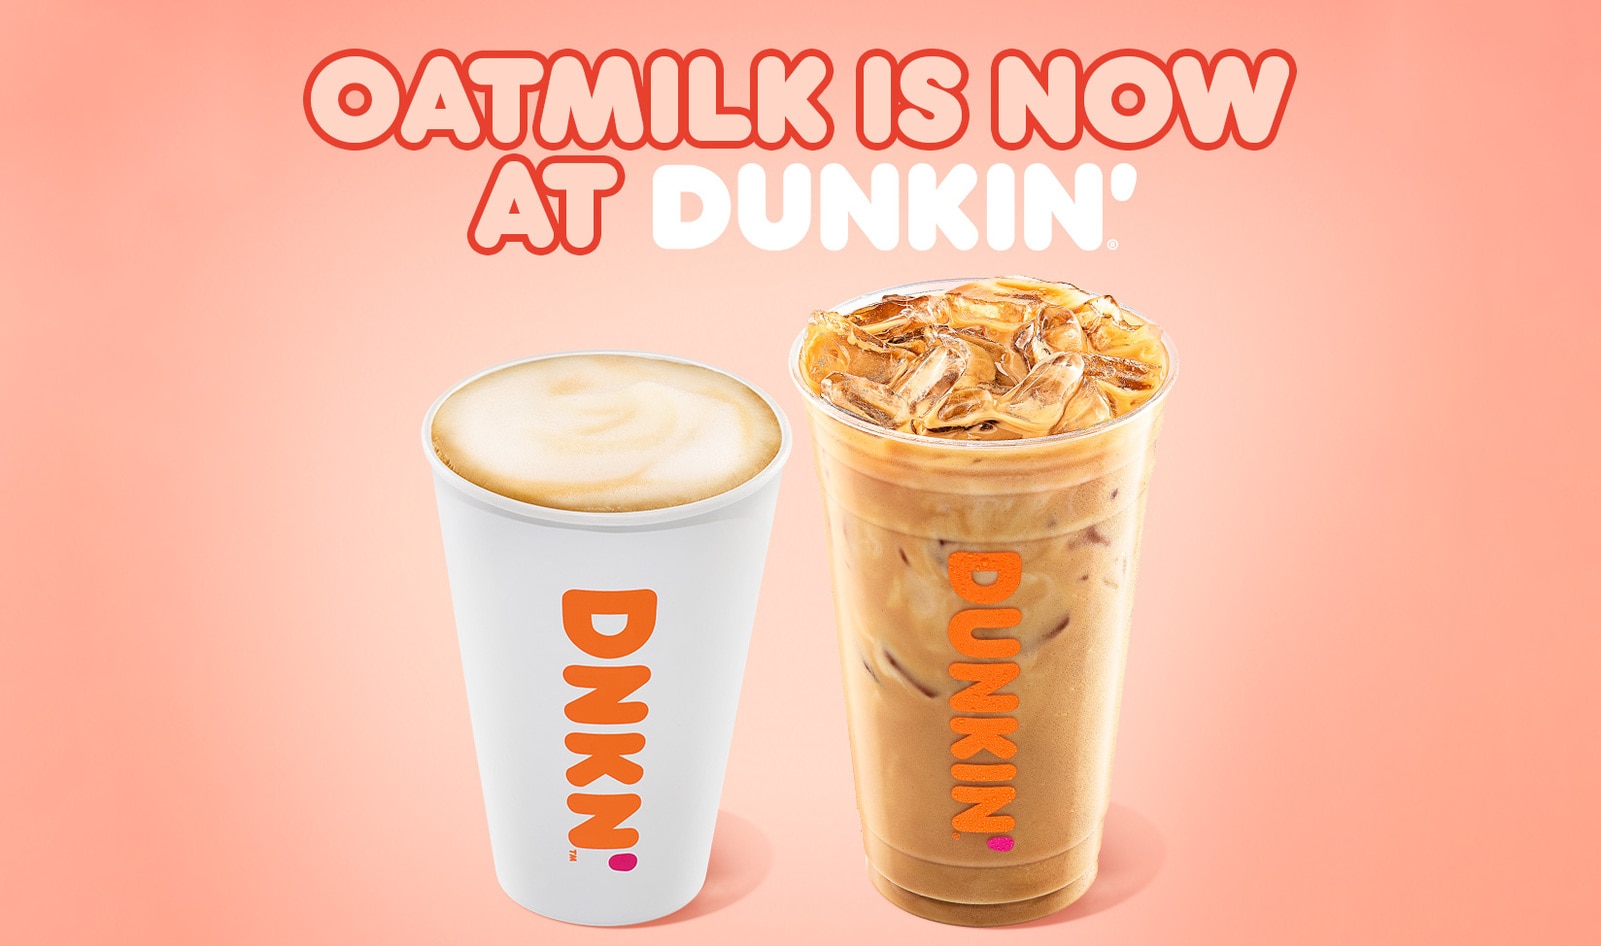 Dunkin’ Officially Launches Oat Milk Nationwide